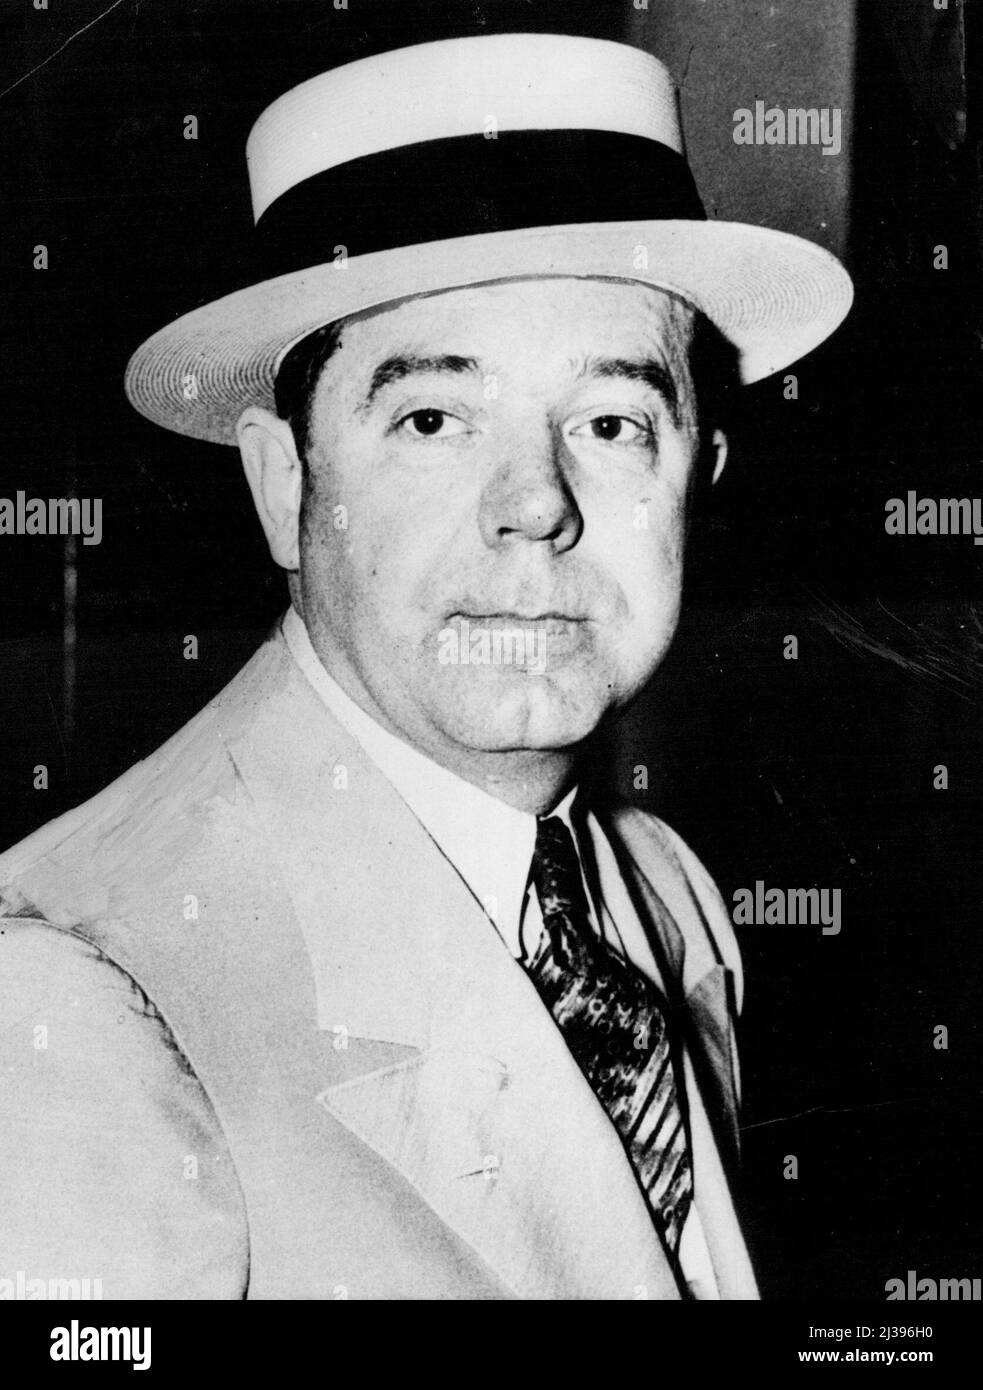 Huey Long Wounded -- Sen. Huey P. Long was shot and seriously wounded in the state capitol building. His assailant was killed. The above recent picture of Long shows him in a typical pose. September 8, 1935. (Photo by Associated Press Photo). Stock Photo